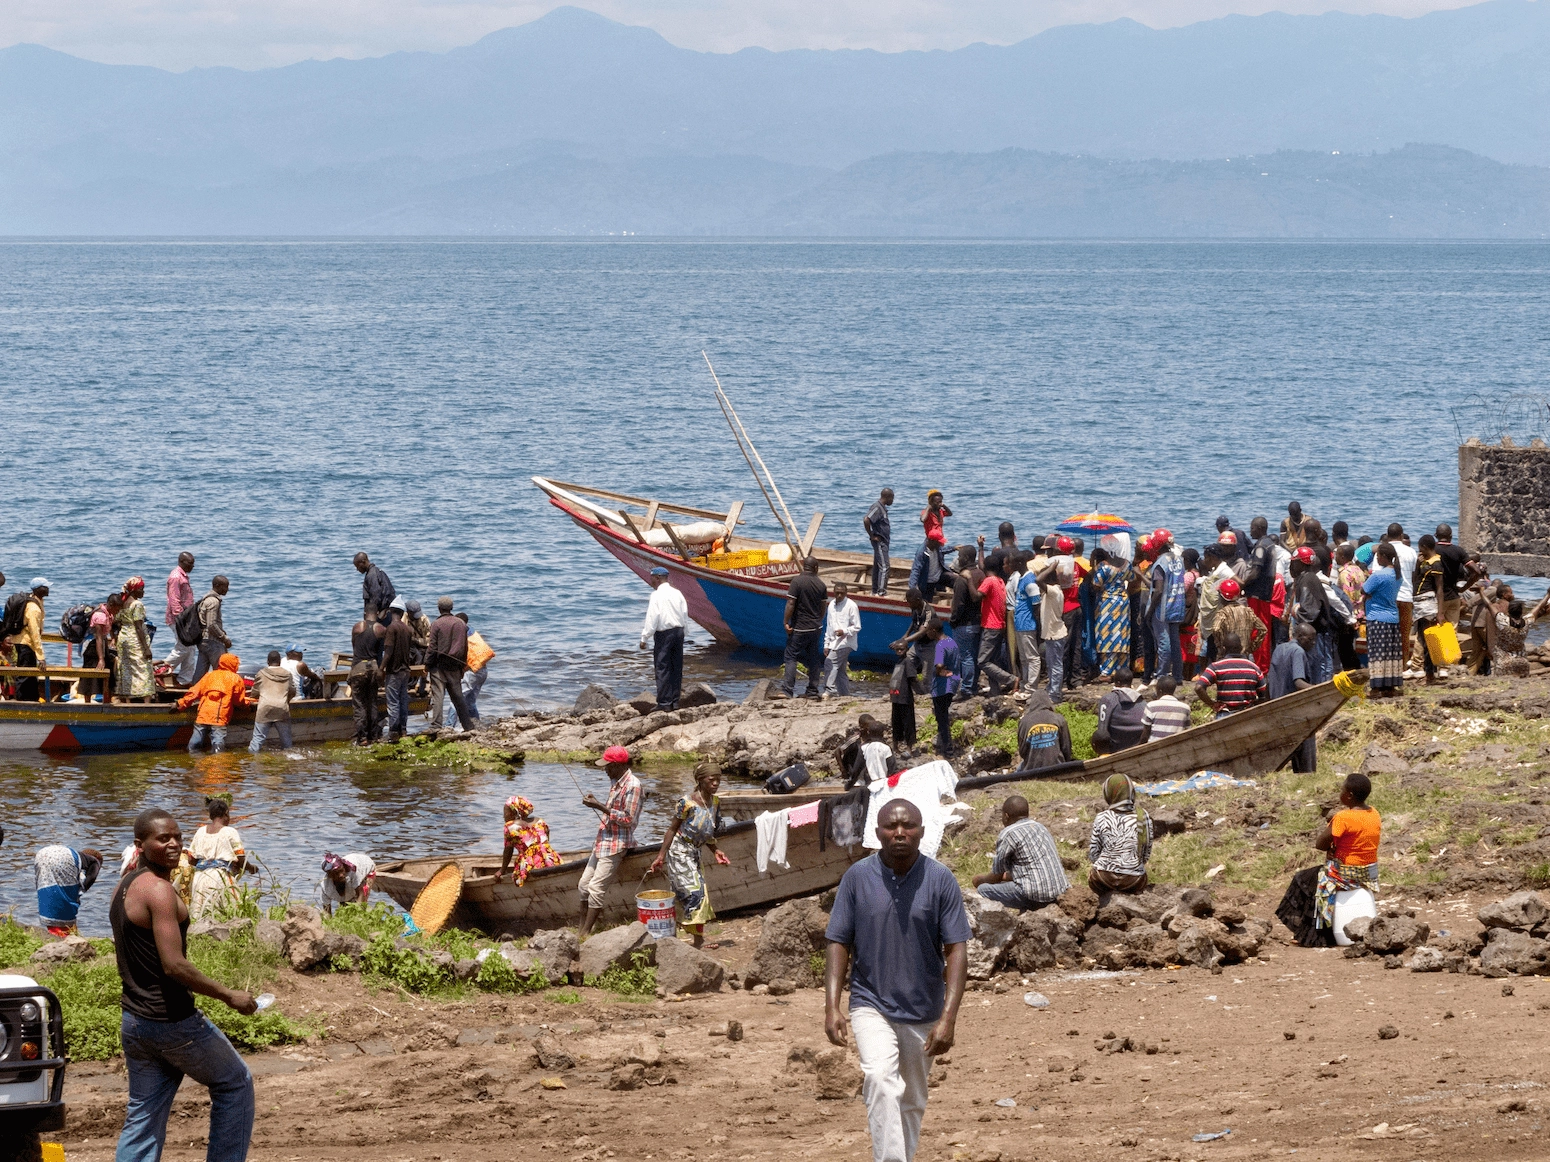 Fishermen bringing in their catch on the shores of Lake Kivu at Goma